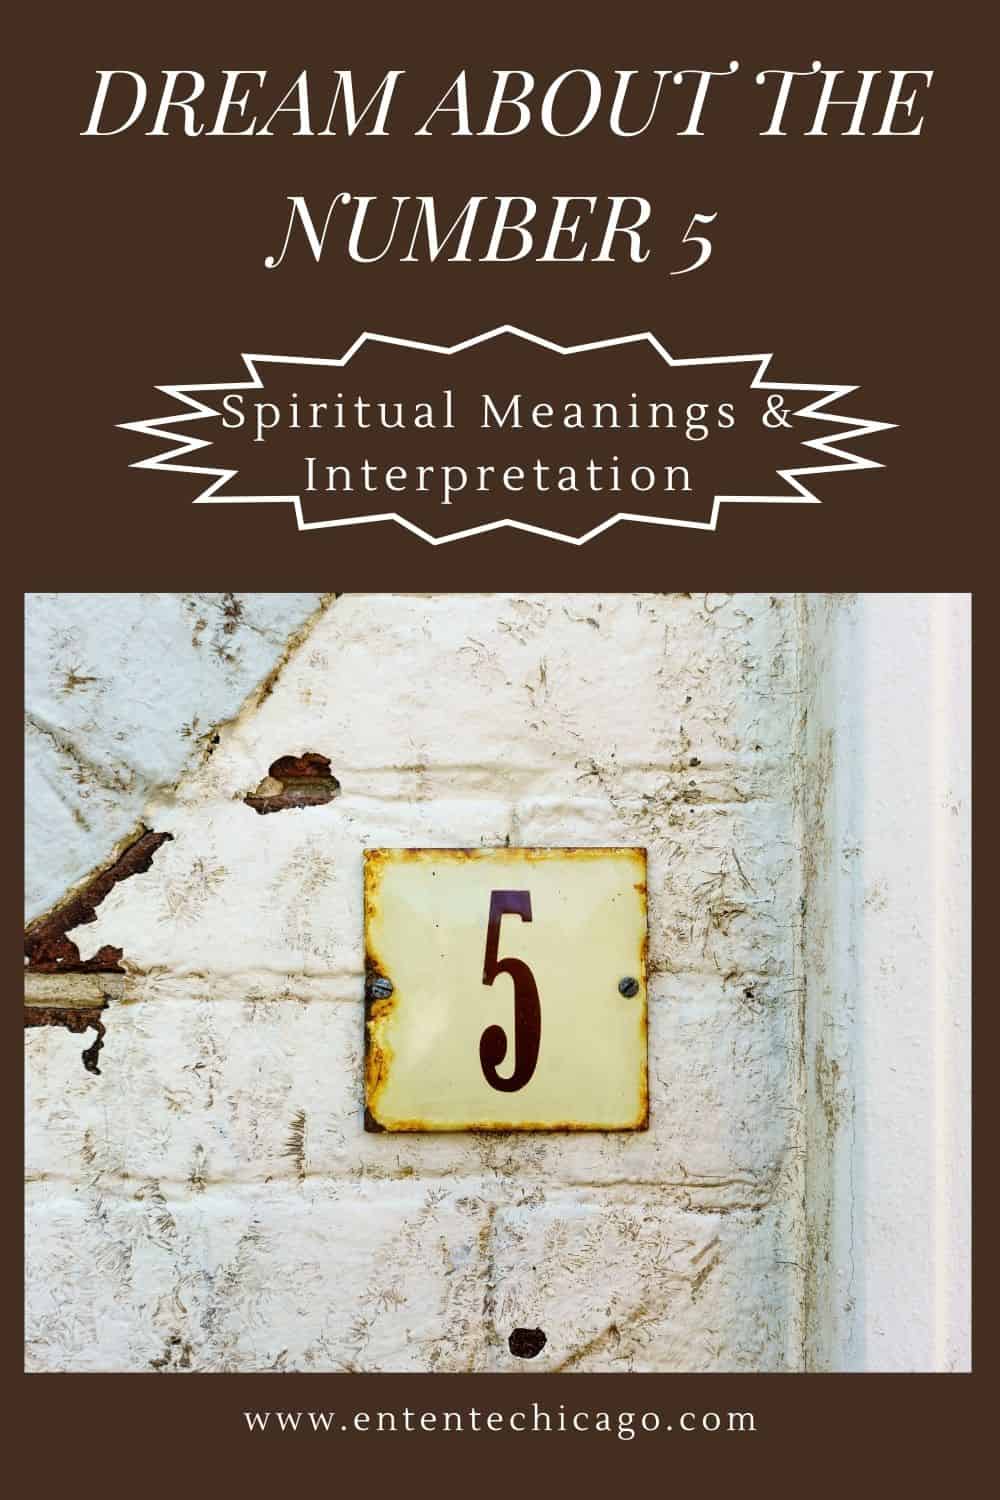 Dream About The Number 5 (Spiritual Meanings & Interpretation)